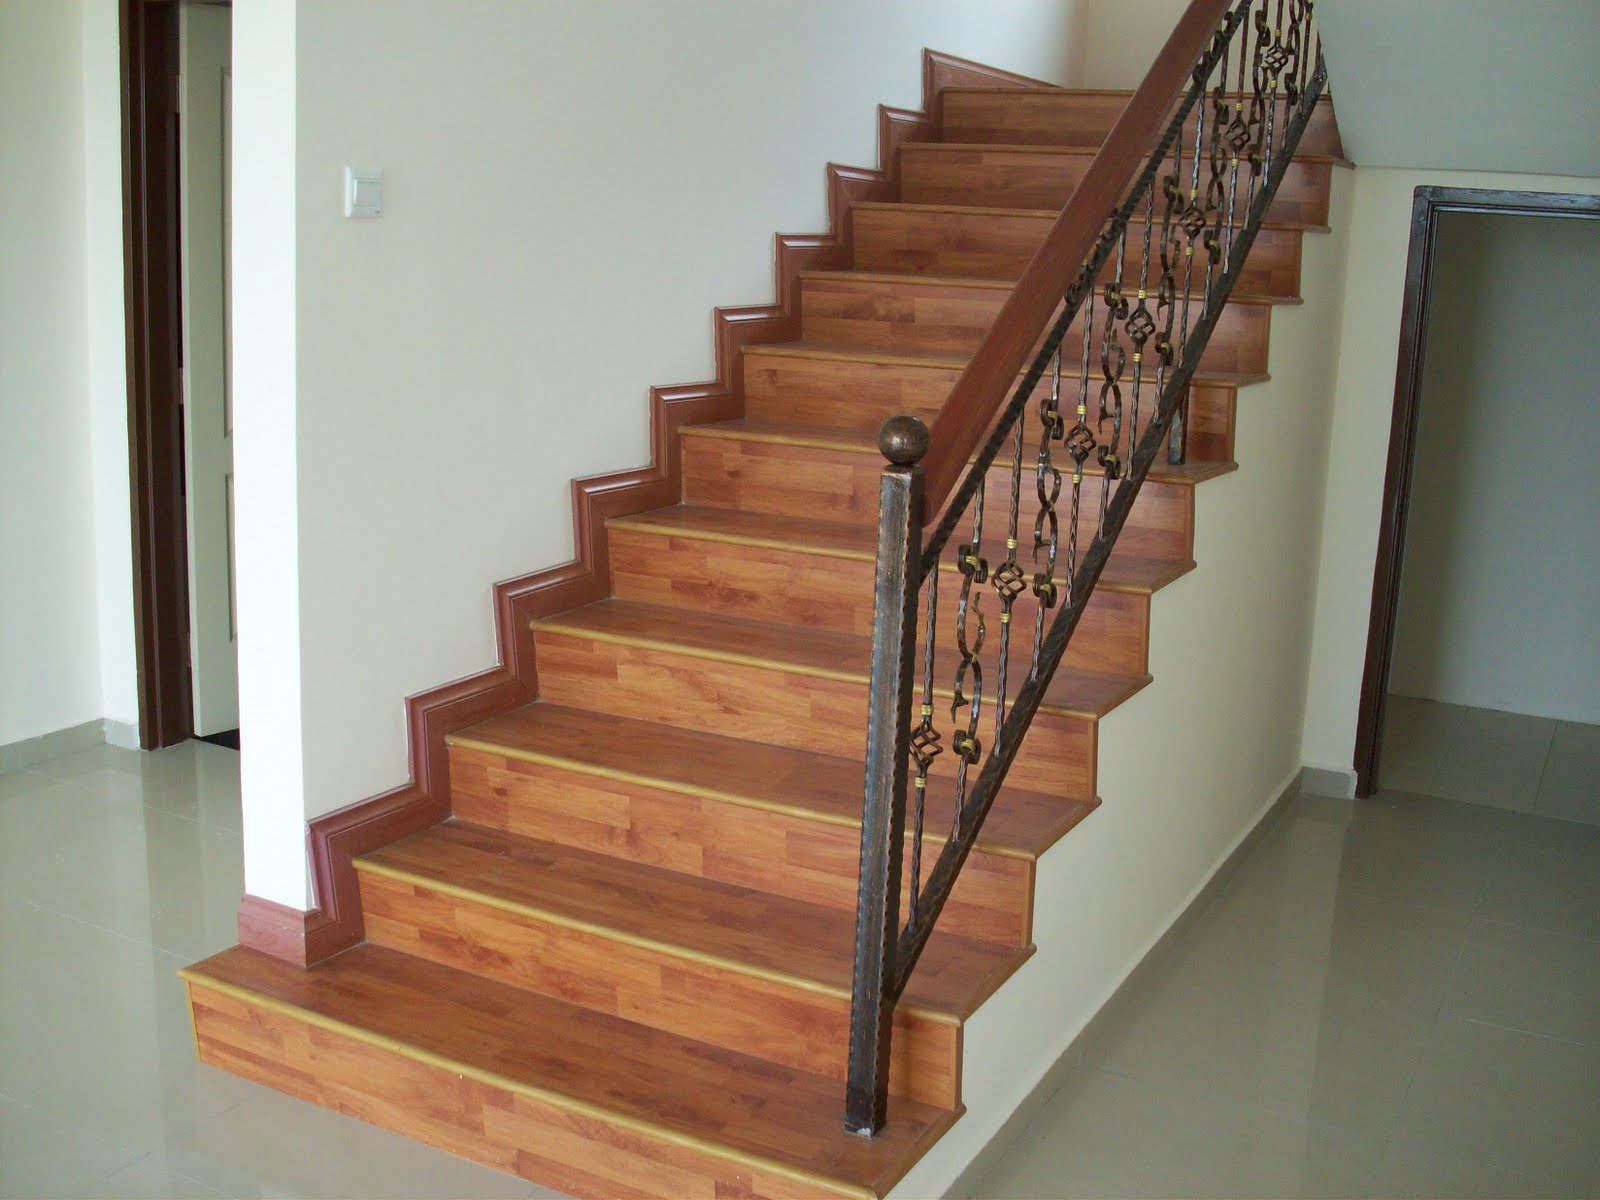 How To Install Wood Flooring On Stairs, How Do You Put Laminate Flooring On Stairs